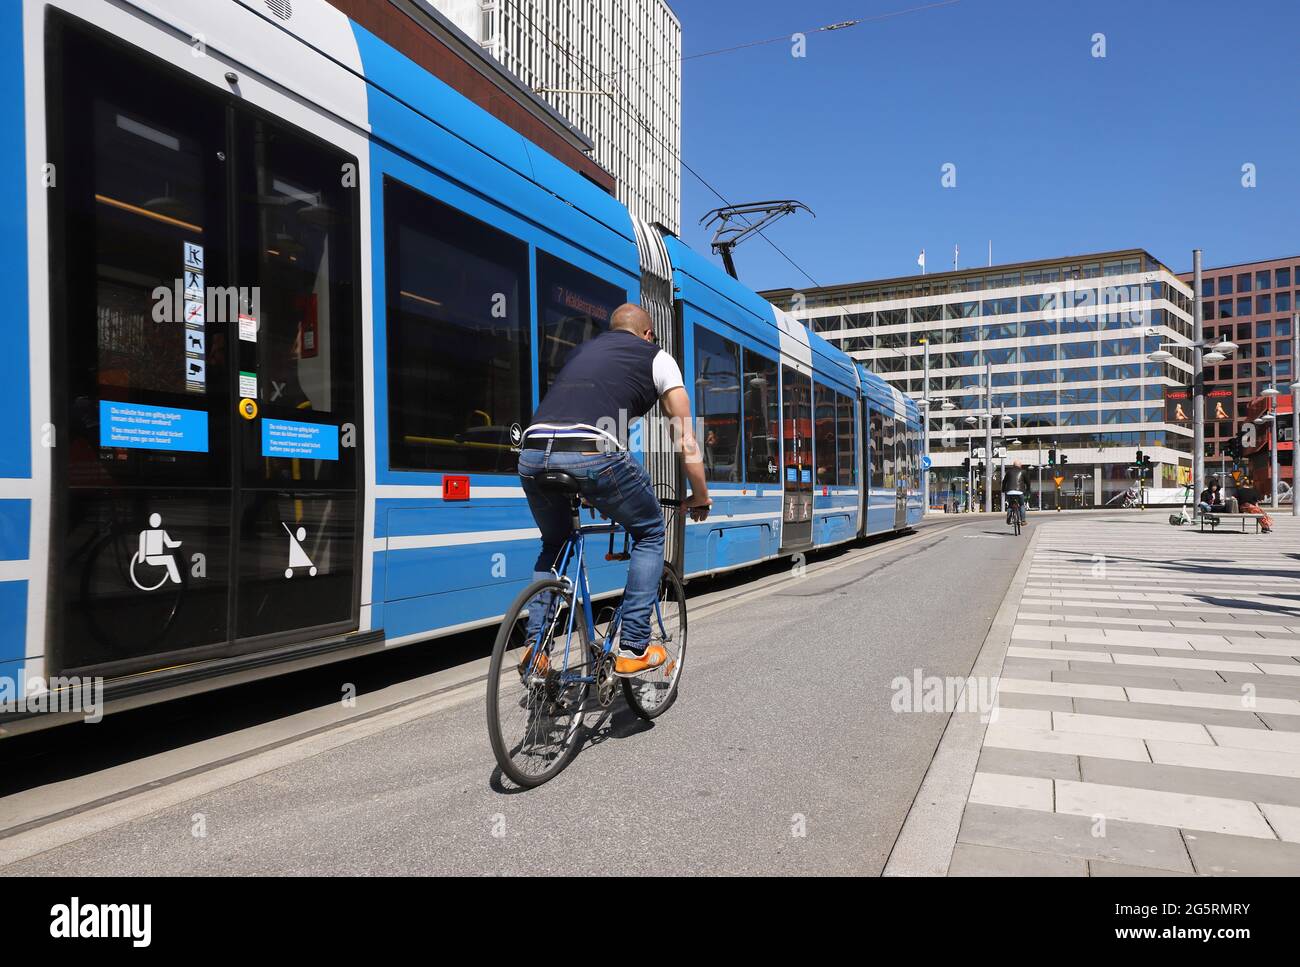 Stockholm, Sweden - May 12, 2021: A man is cycling in central Stockholm next to a modern tram on line 7 at the Sergels torg square. Stock Photo